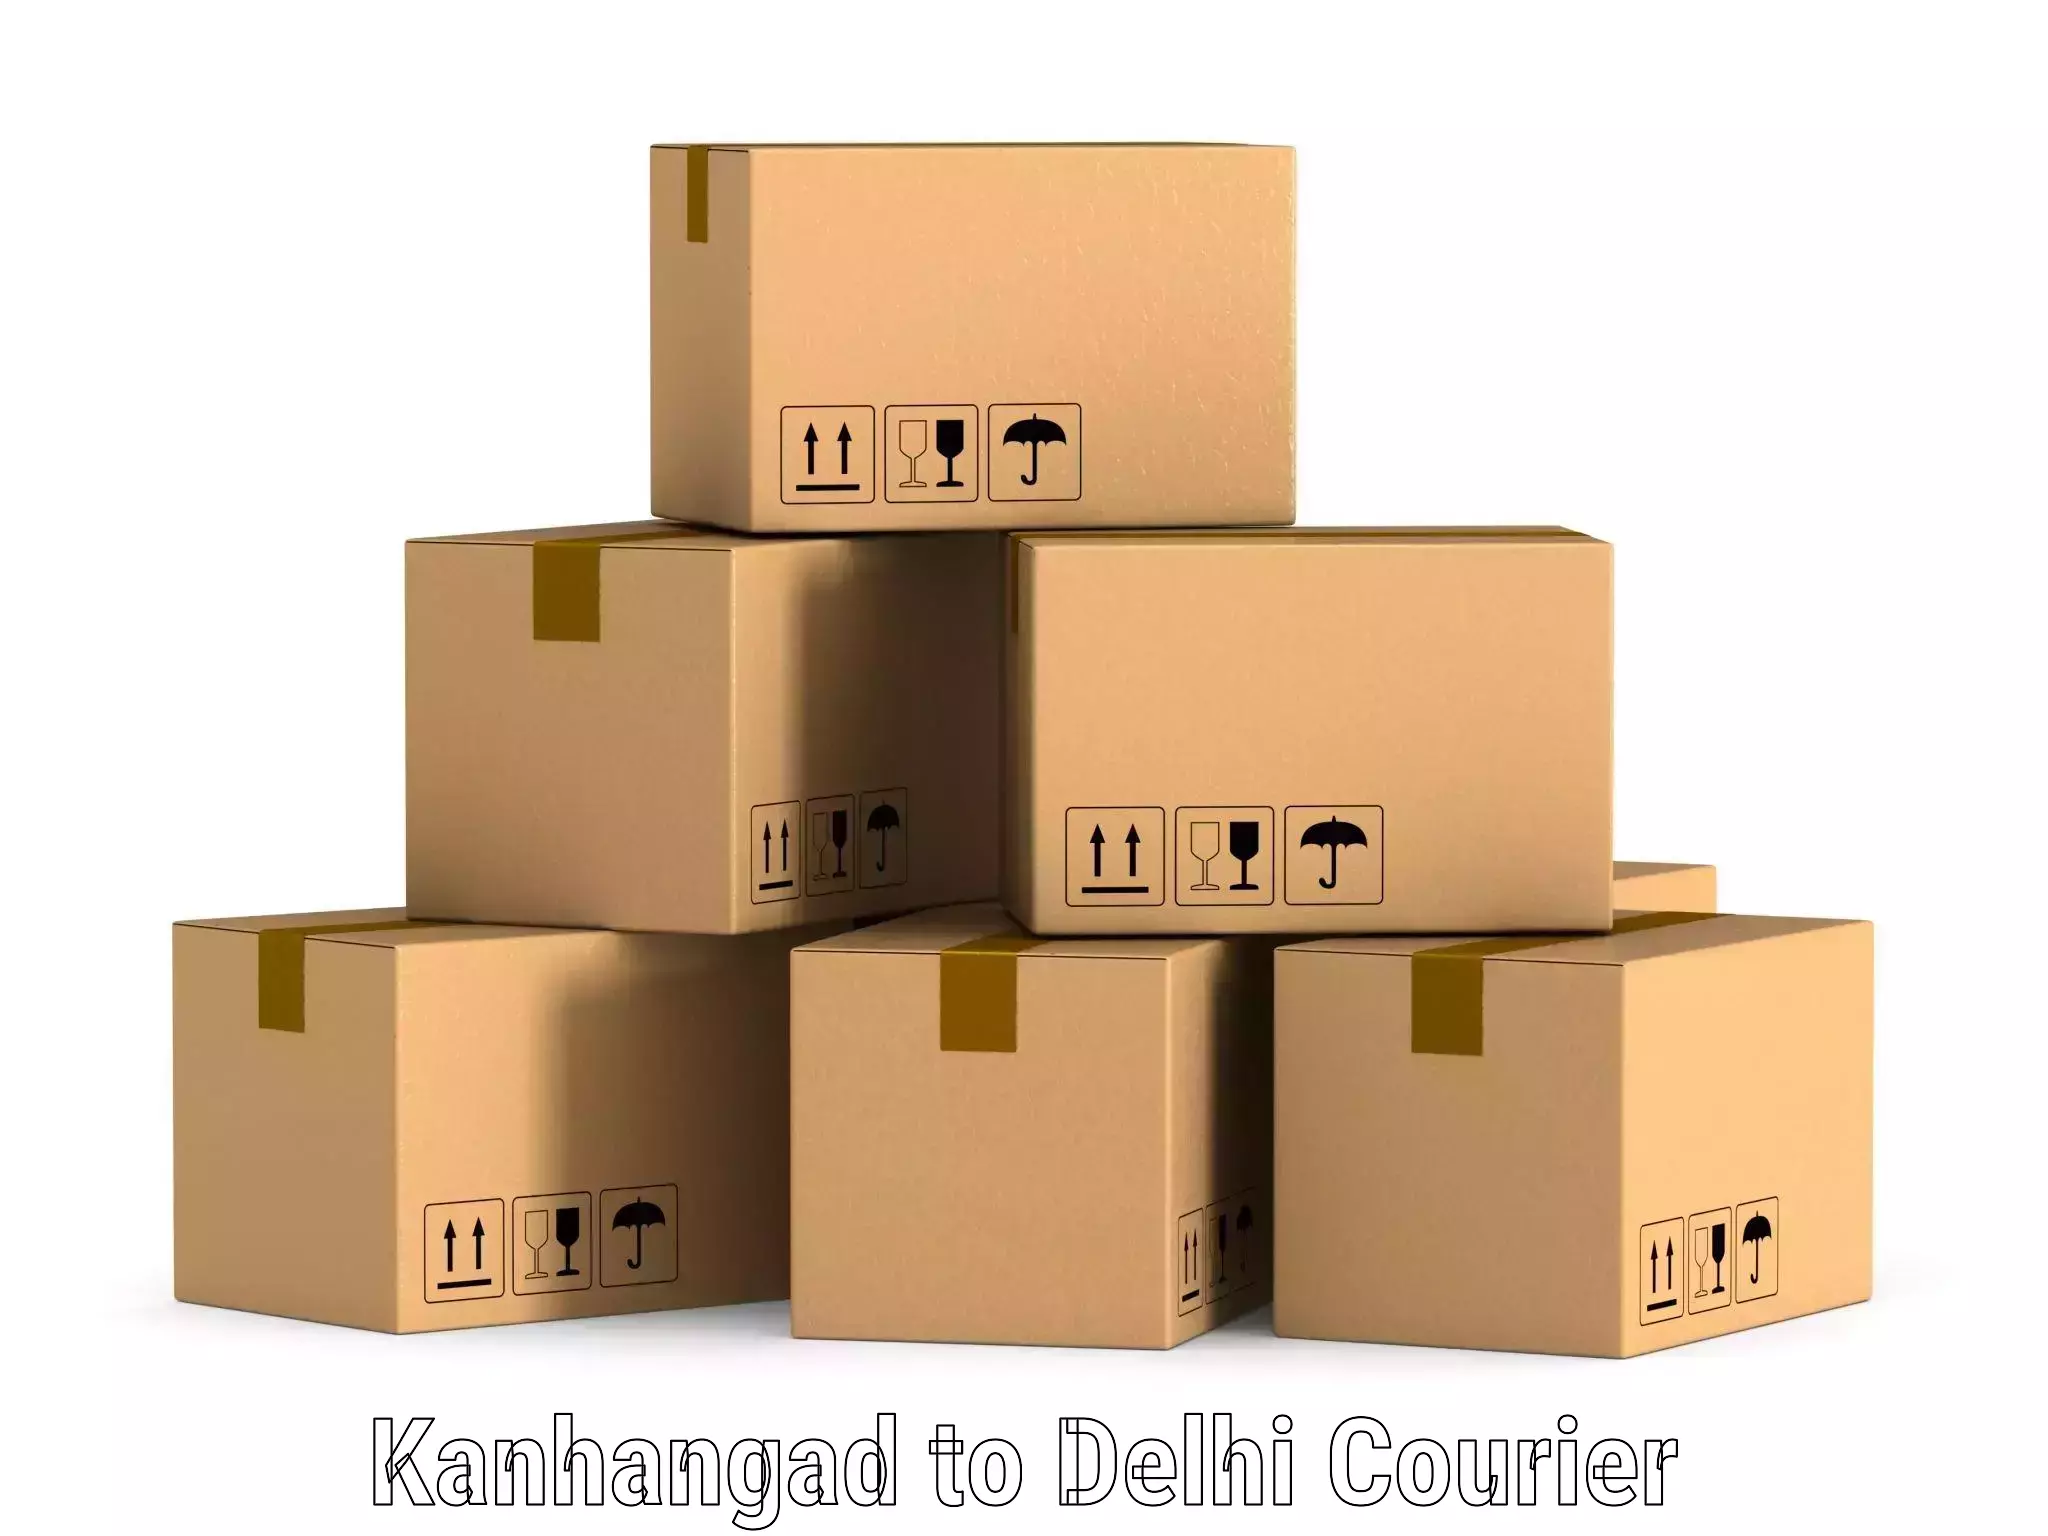 High-quality delivery services Kanhangad to University of Delhi